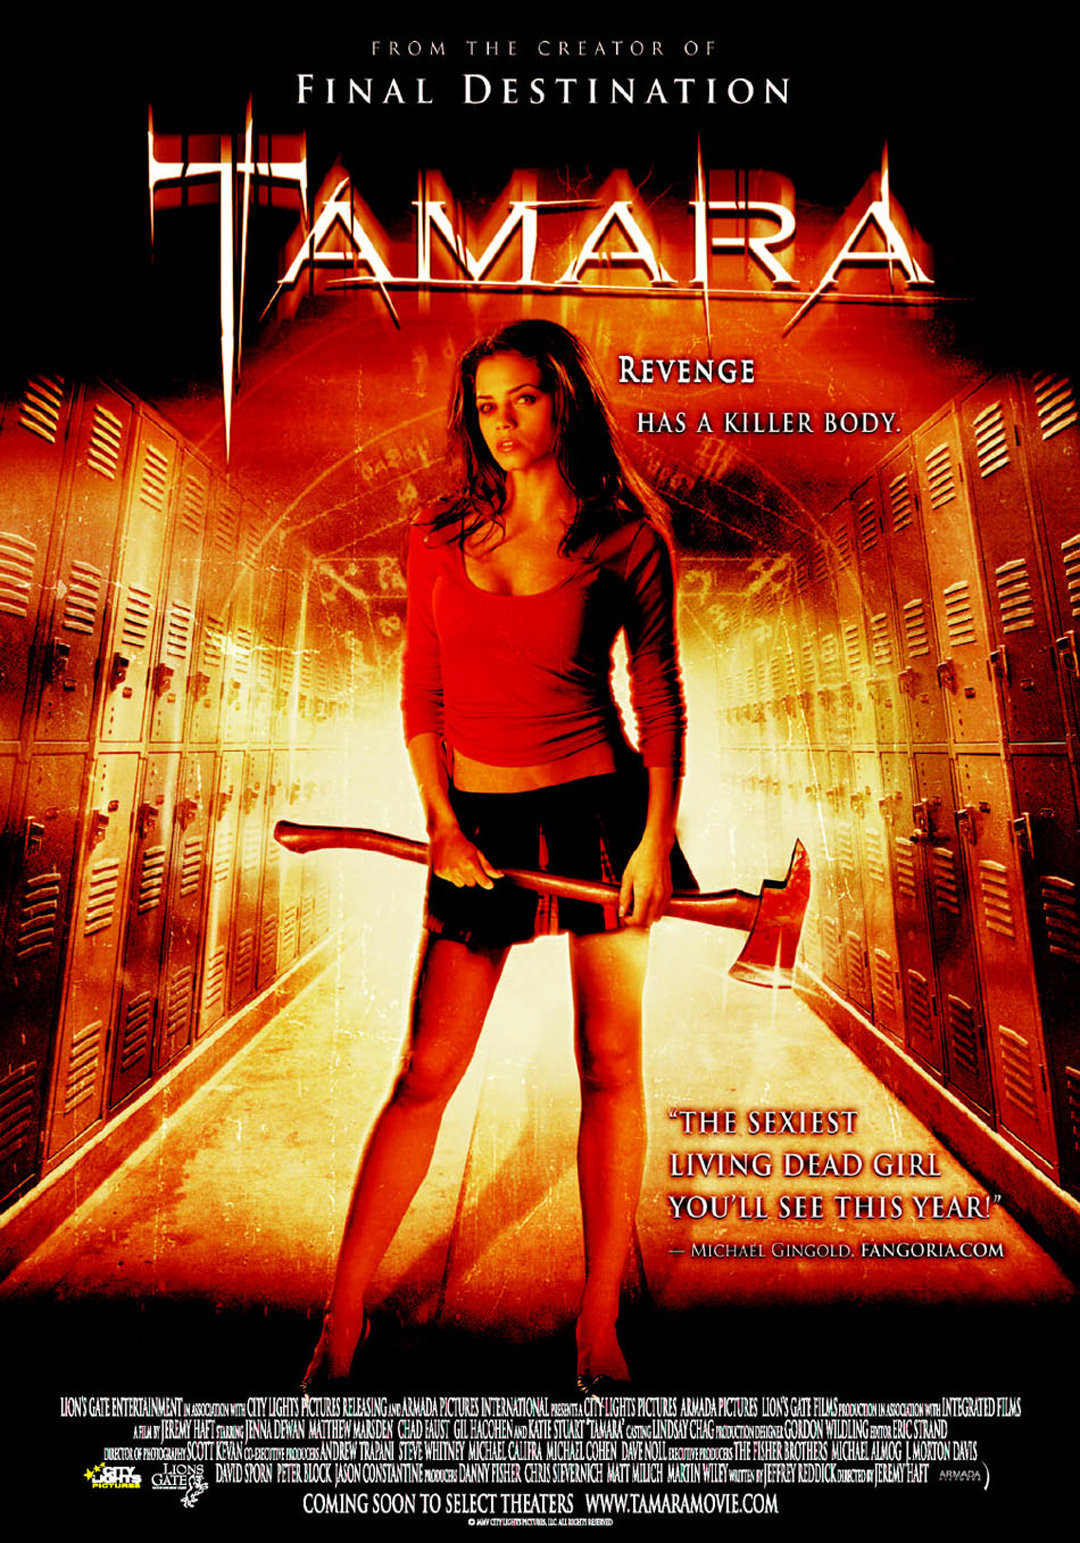 Poster for the movie "Tamara"